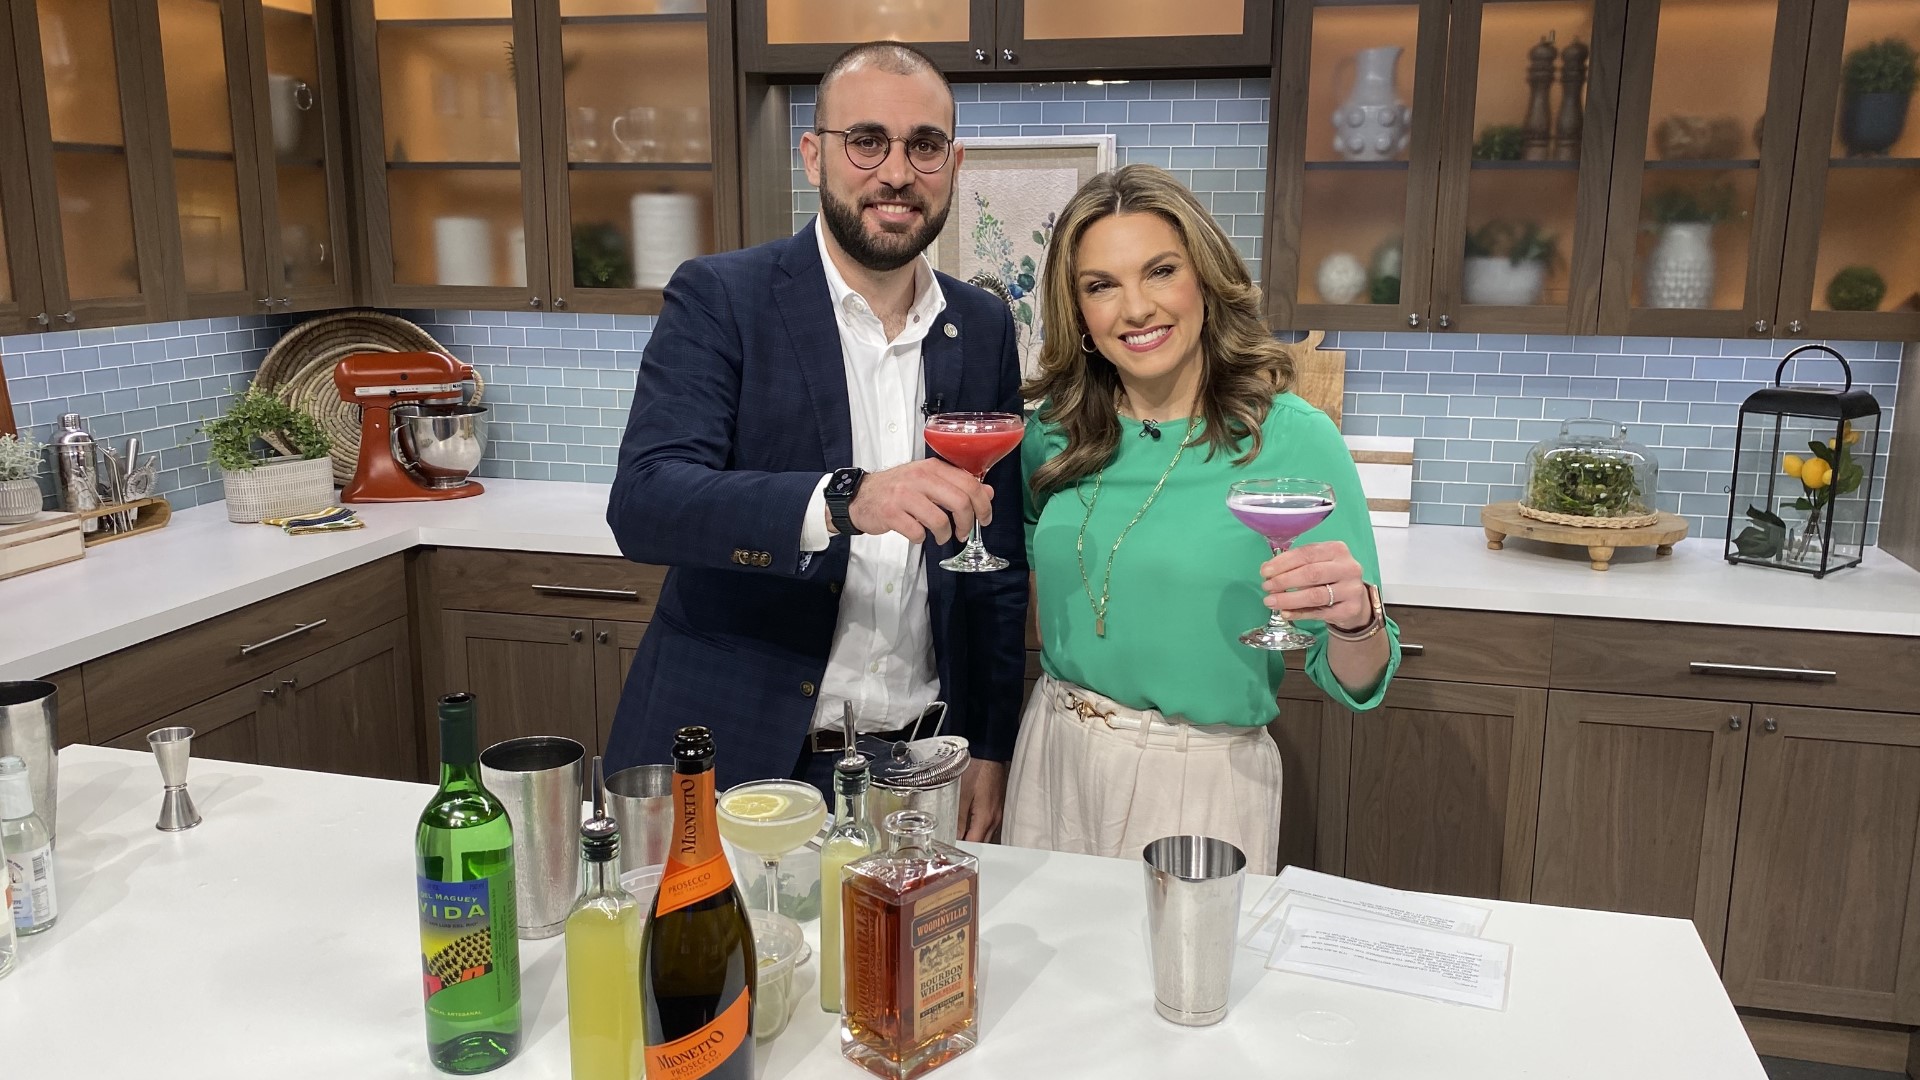 Volkan Temel shares his favorite springtime drinks that are available at The Edgewater’s waterfront restaurant Six Seven.